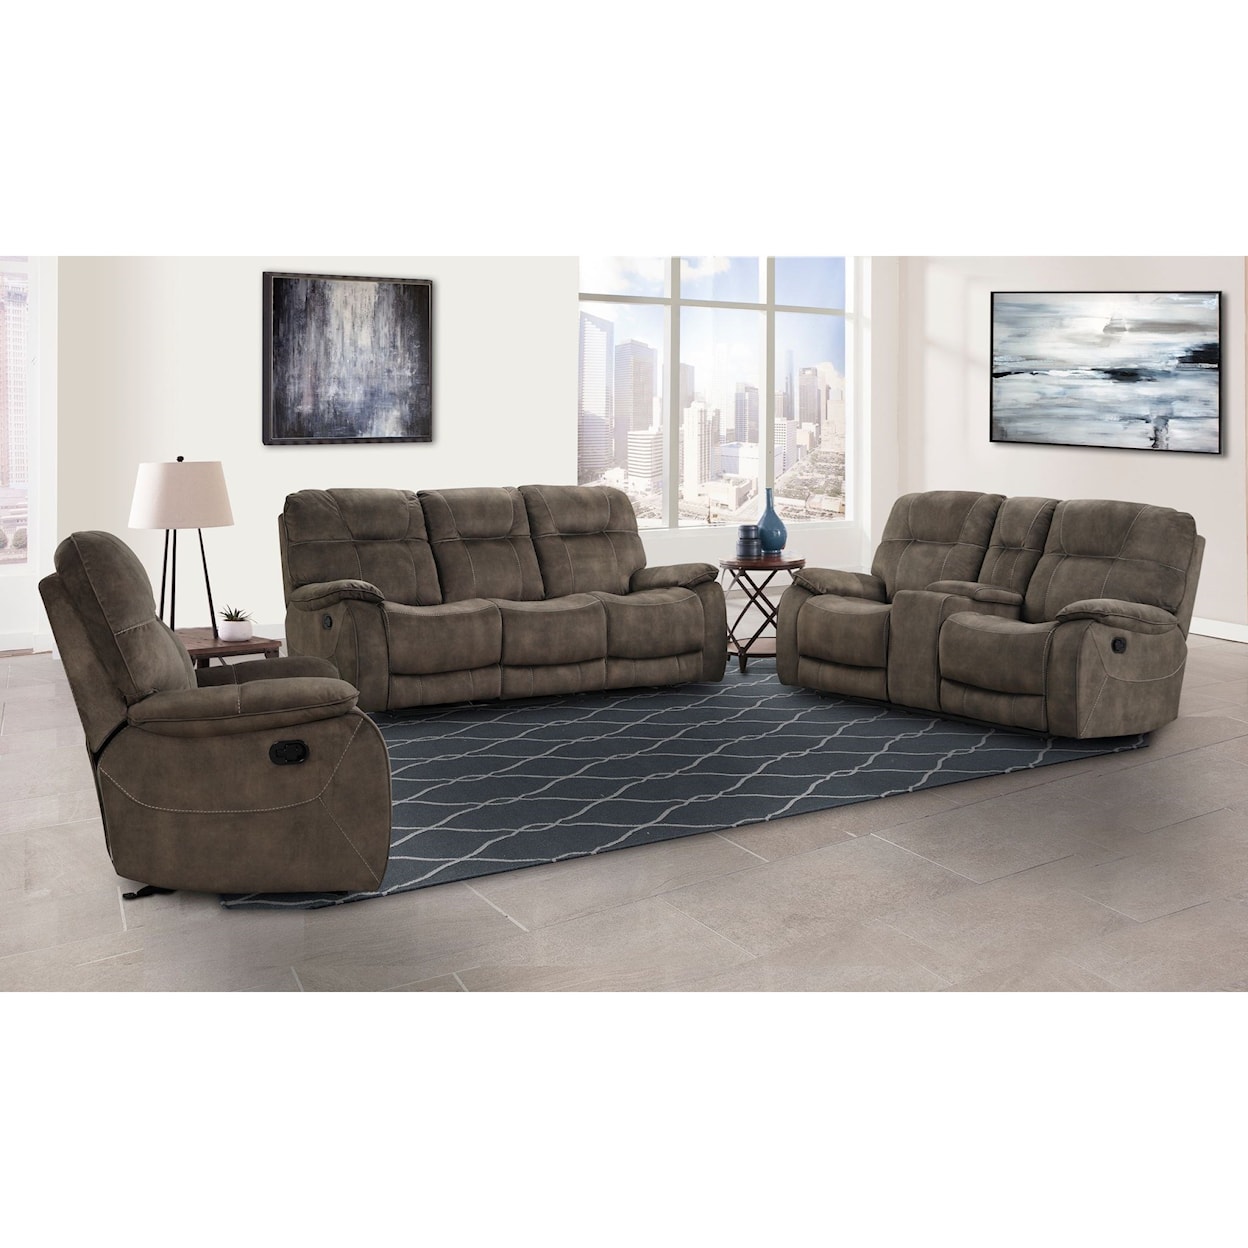 Paramount Living Cooper Reclining Living Room Group